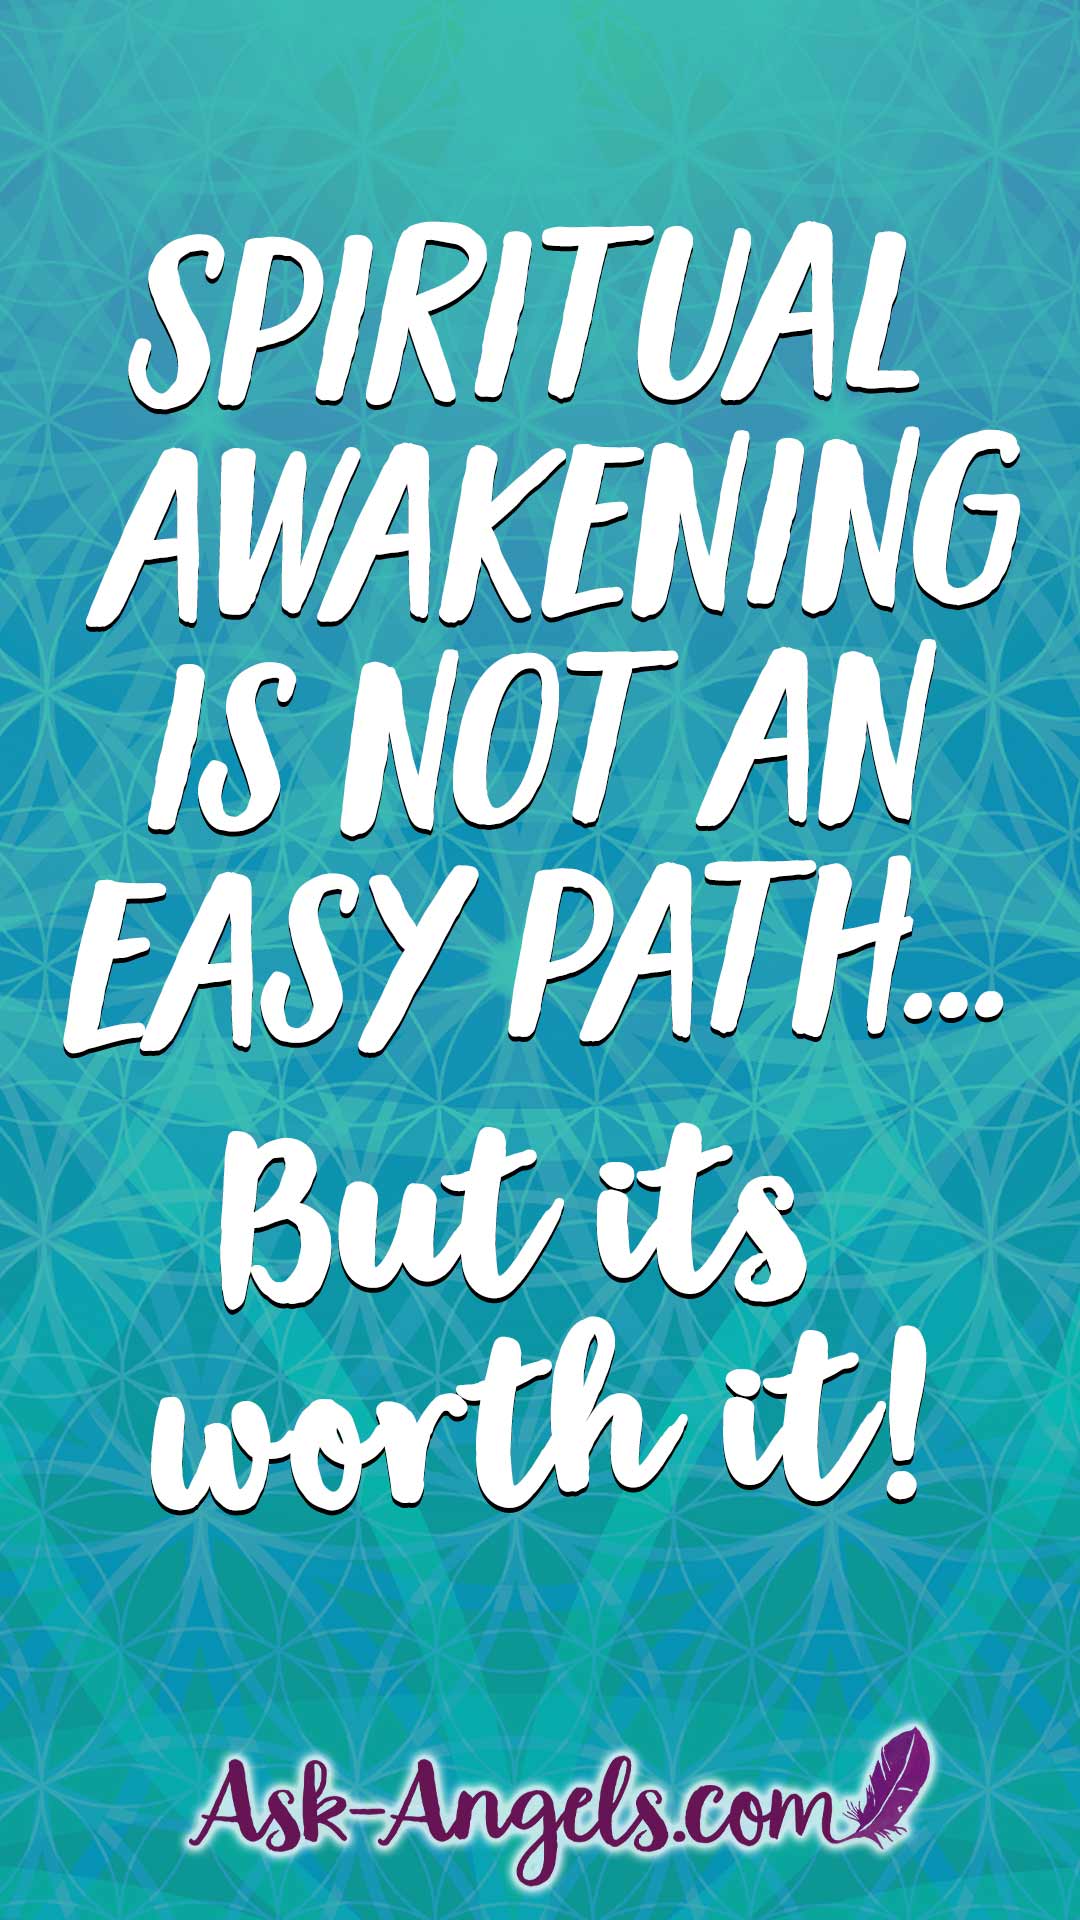 Spiritual Awakening is not an easy path... But its worth it!